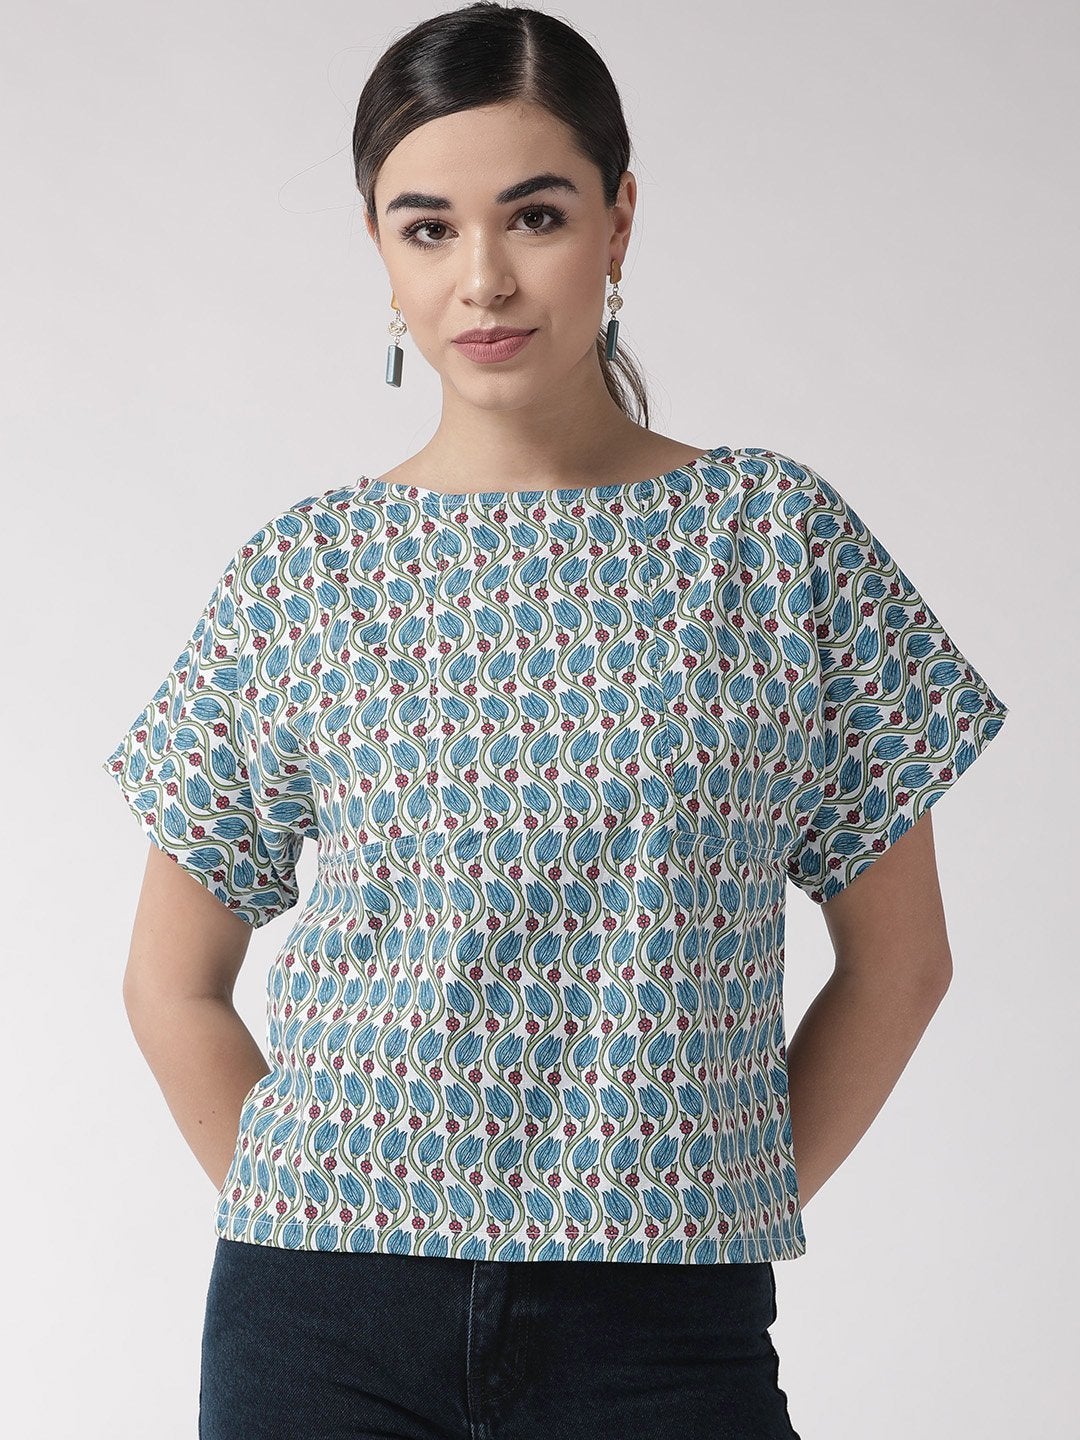 Women's Blue Floral Top - InWeave